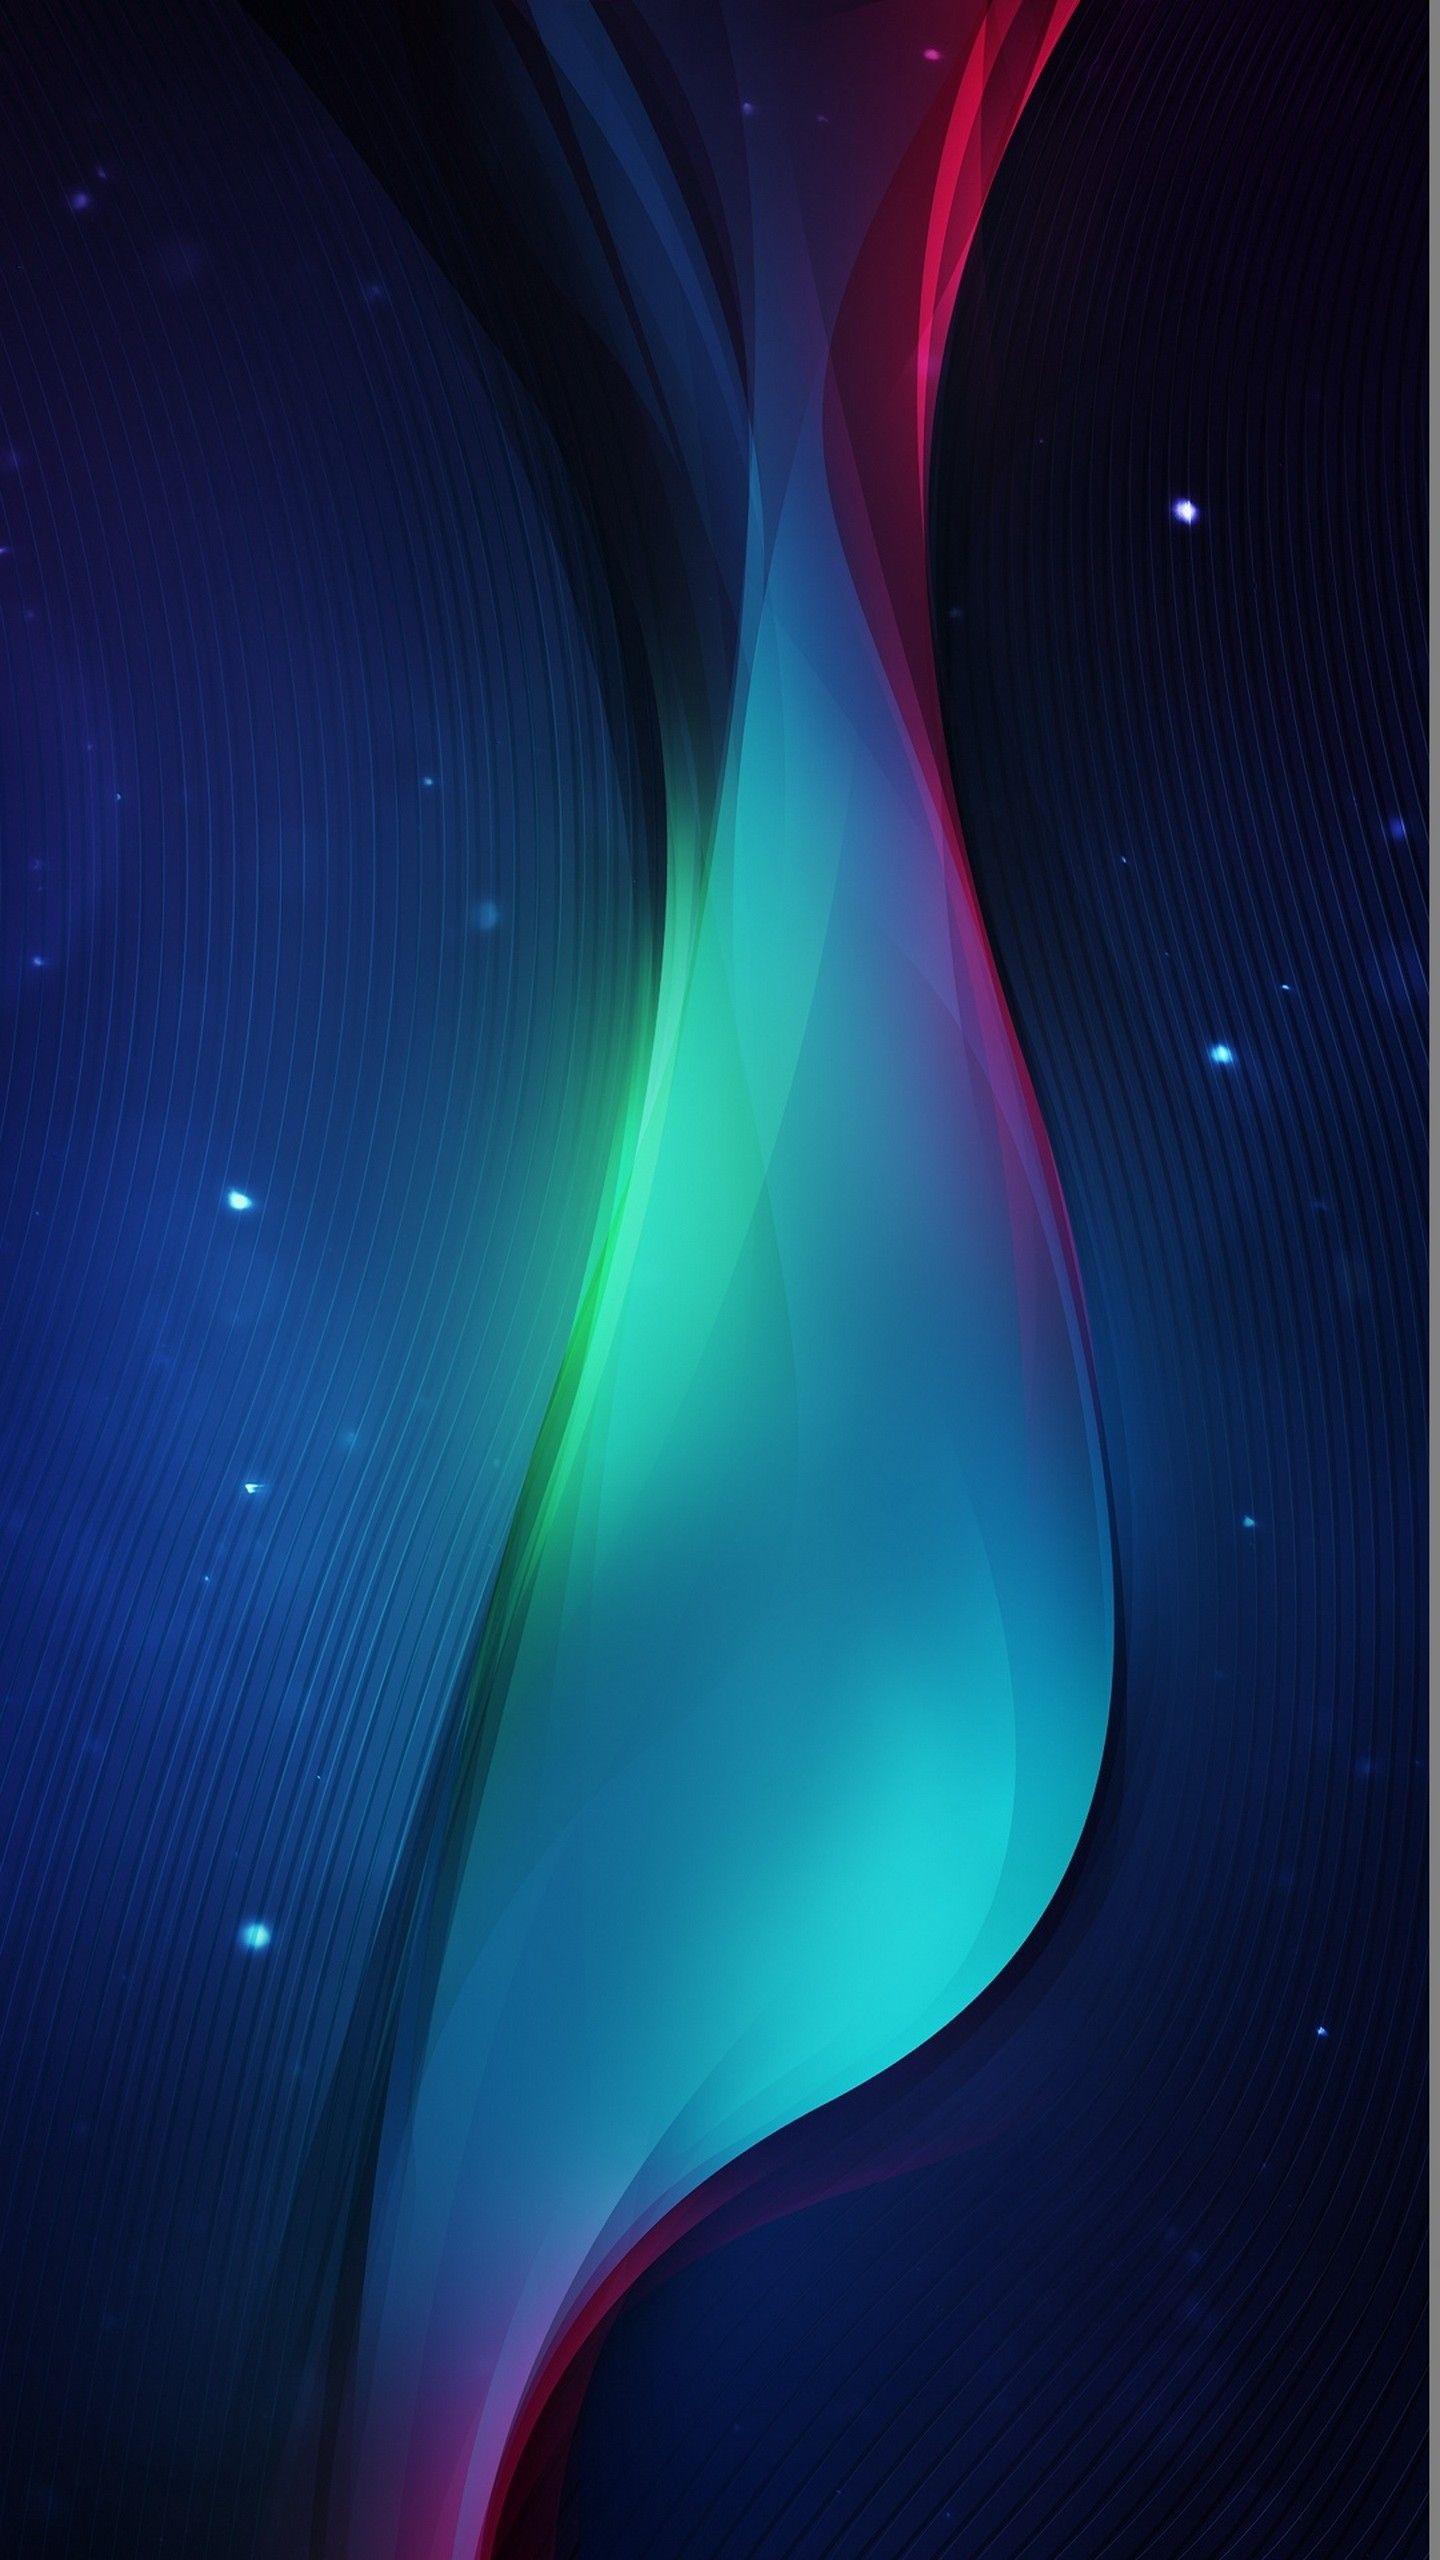 Abstract Samsung Galaxy S6 Android Wallpaper free download